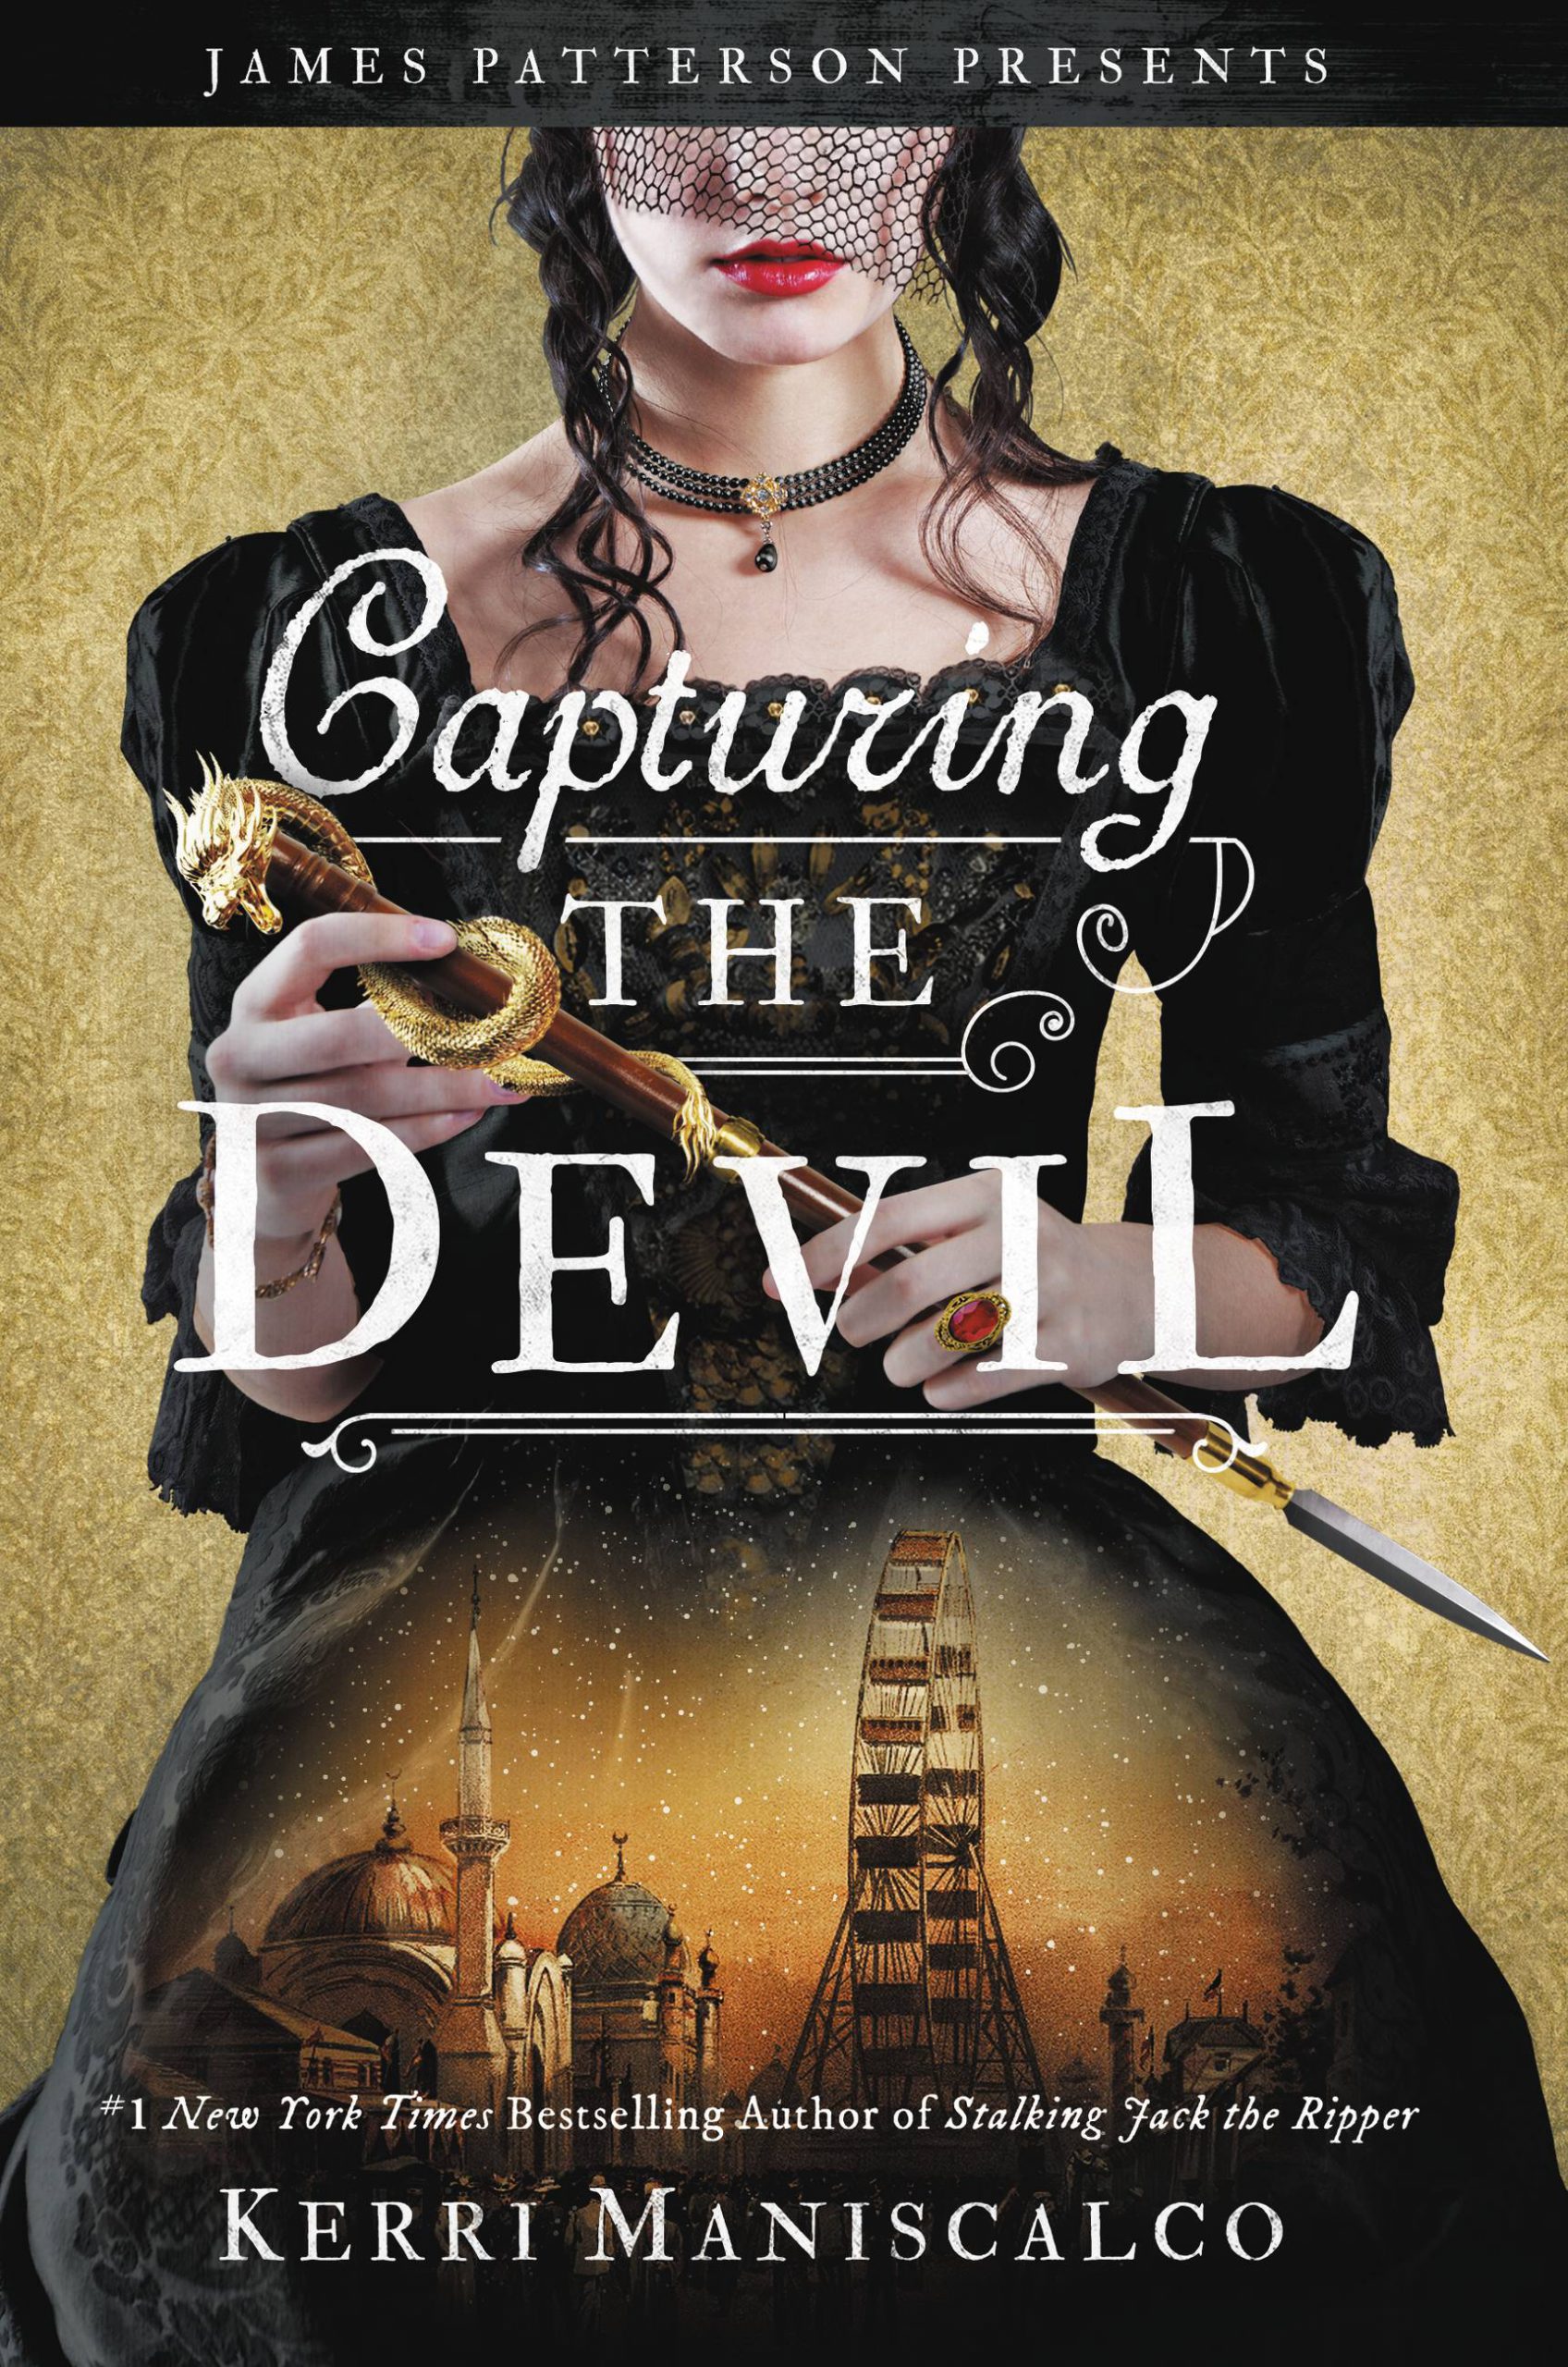 Bookcover Capturing the Devil from Kerri Maniscalco. You see a mysterious lady and the background is a fair.